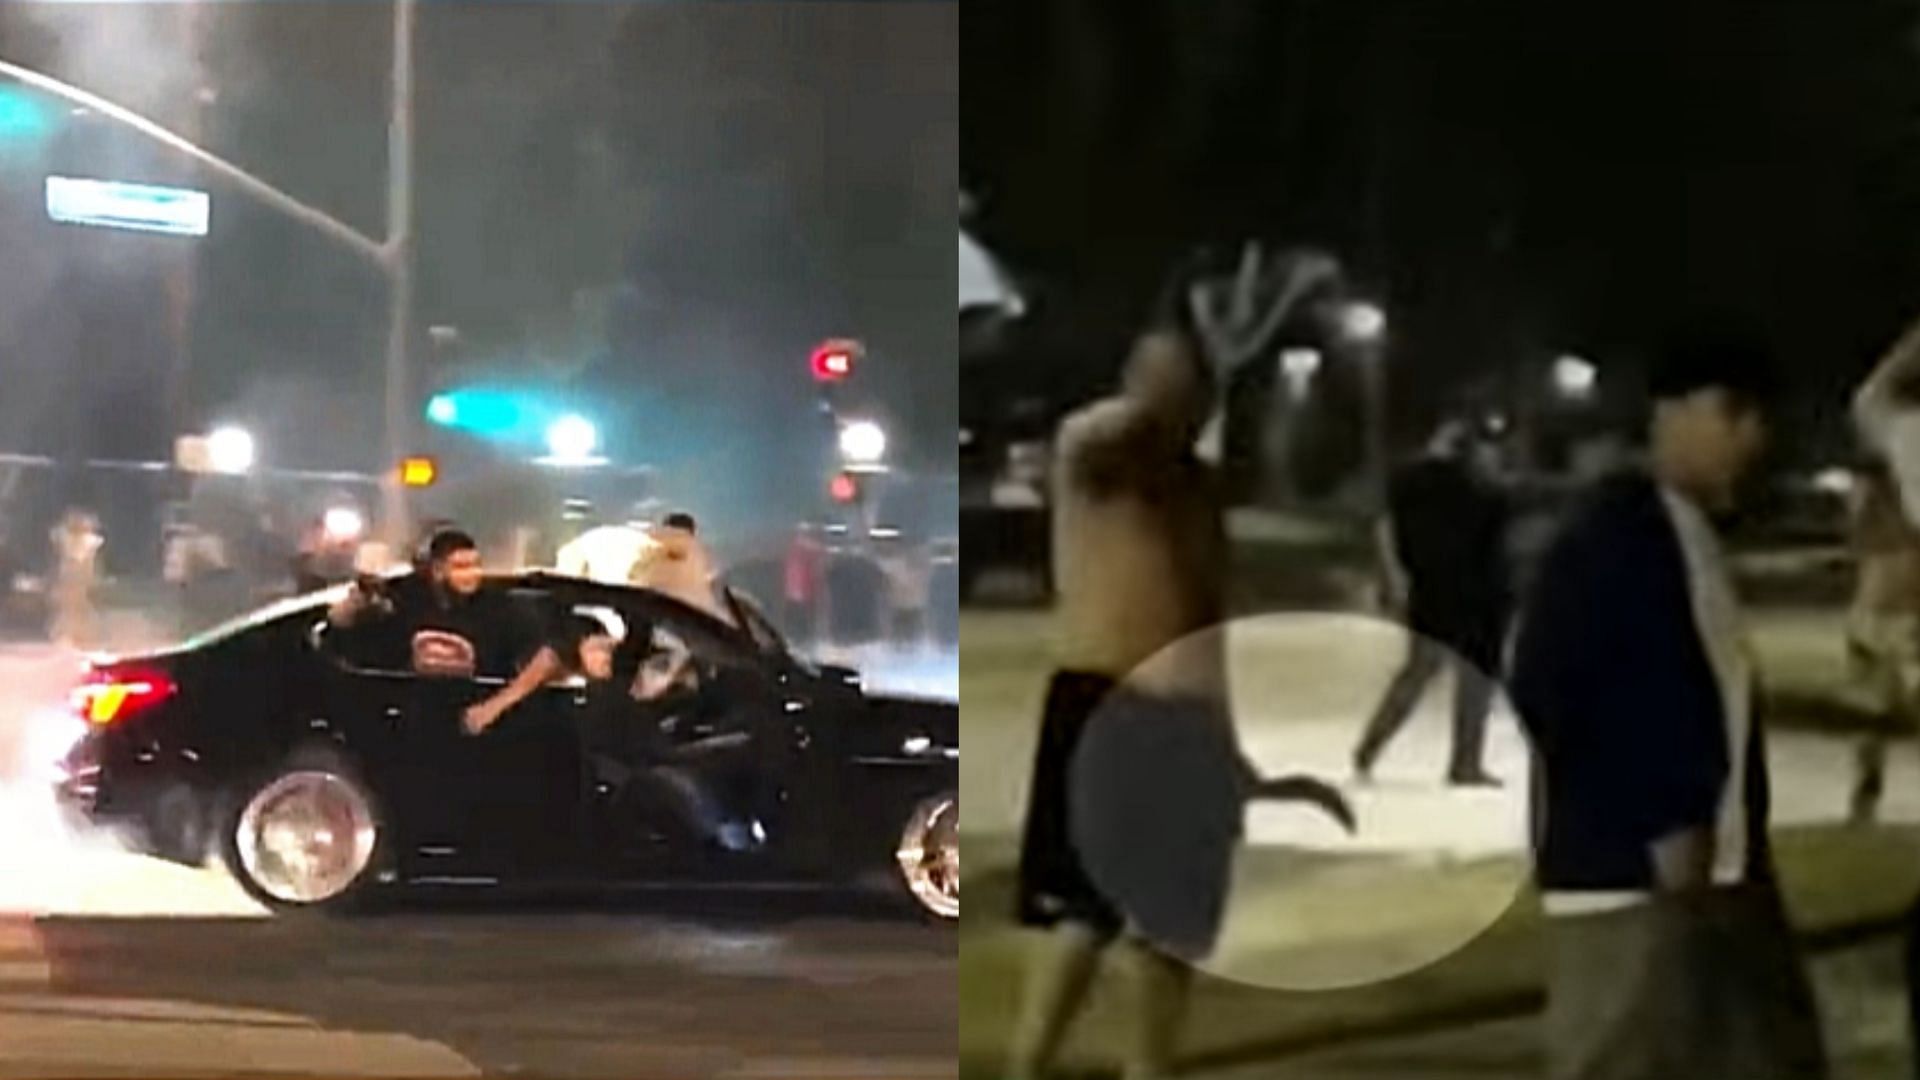 Tired of midnight street takeovers, an Anaheim man took matters in his own hands and threated crowds with a machete (Images via YouTube videos)